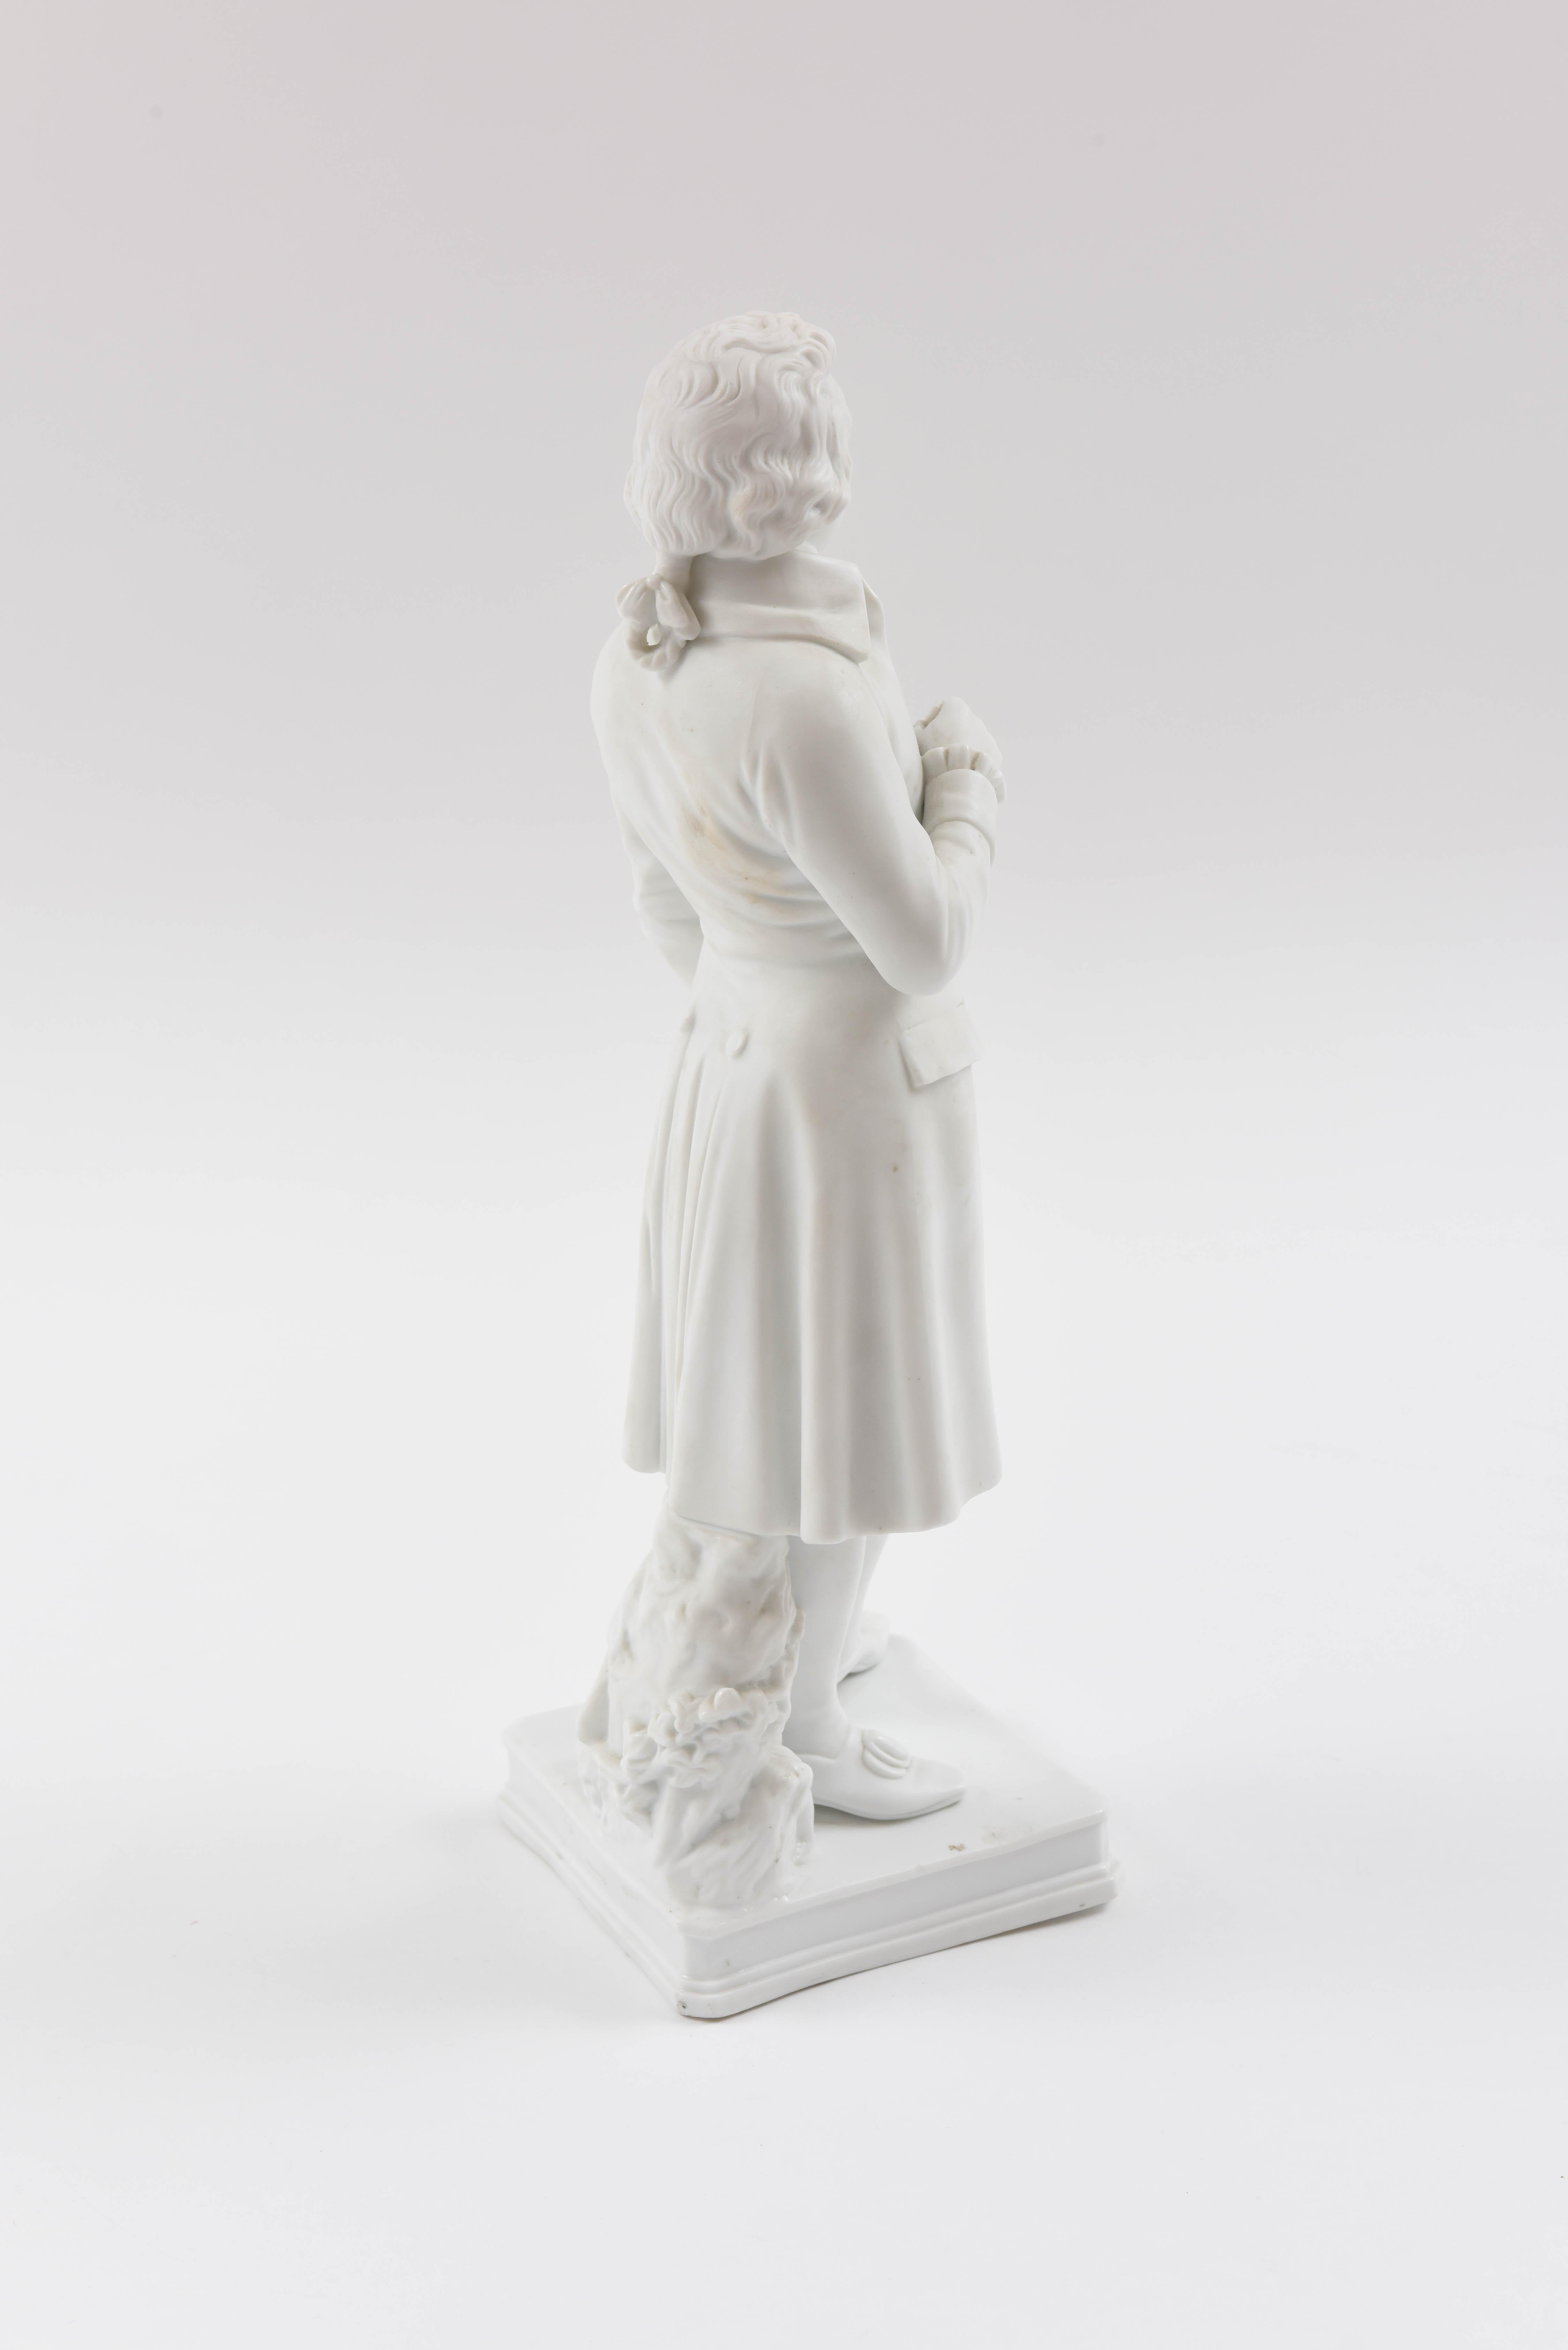 Mid-19th Century Mozart White Parian Figure, 19th Century, Tall and Regal